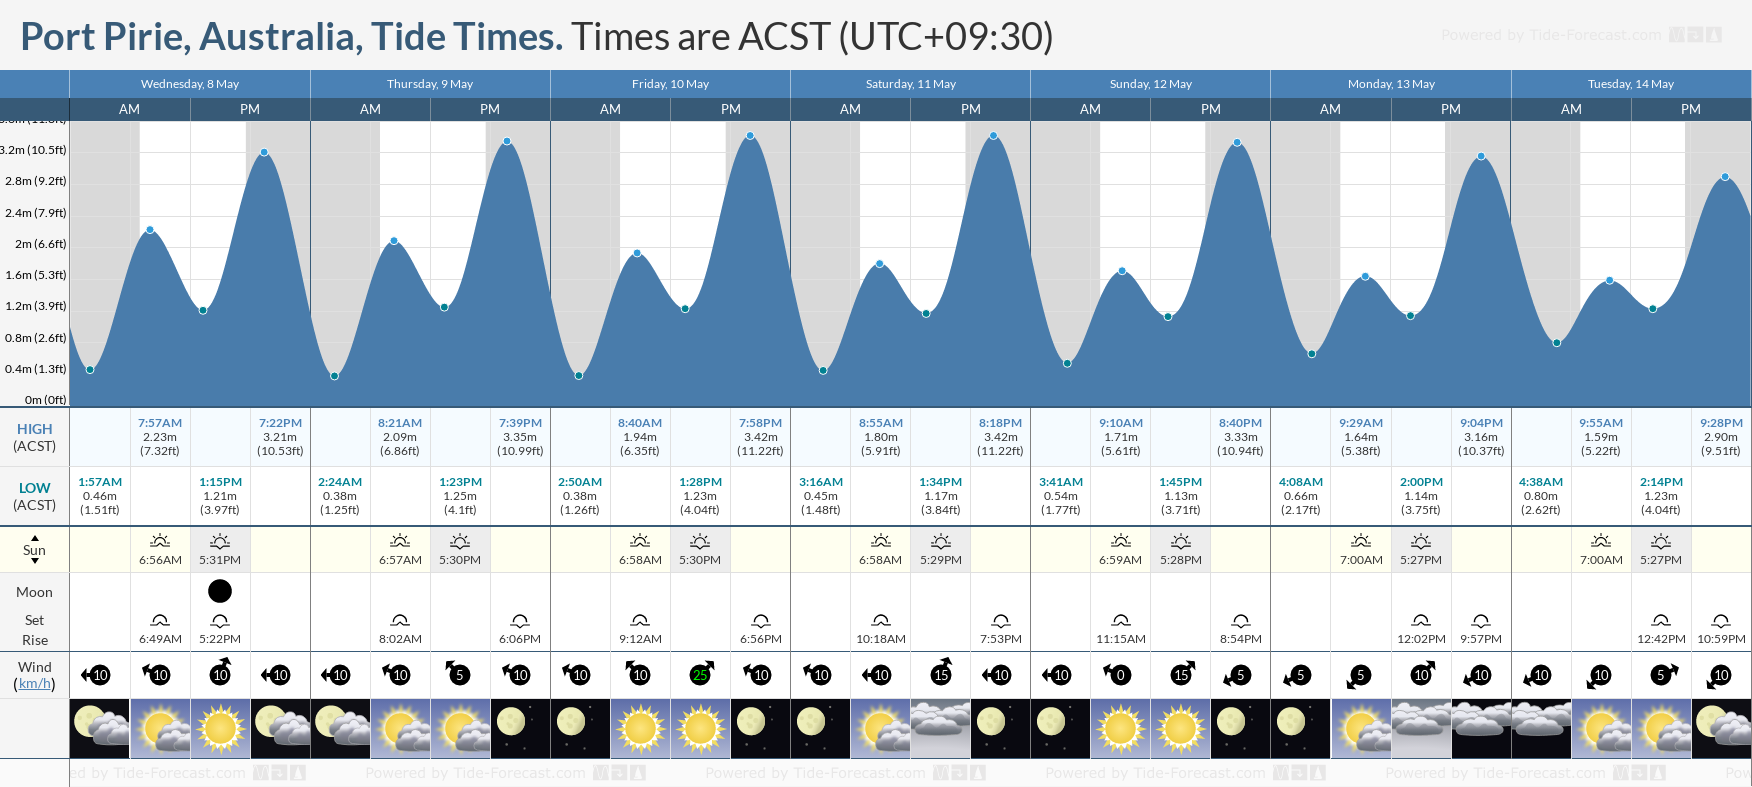 Port Pirie, Australia Tide Chart including high and low tide tide times for the next 7 days